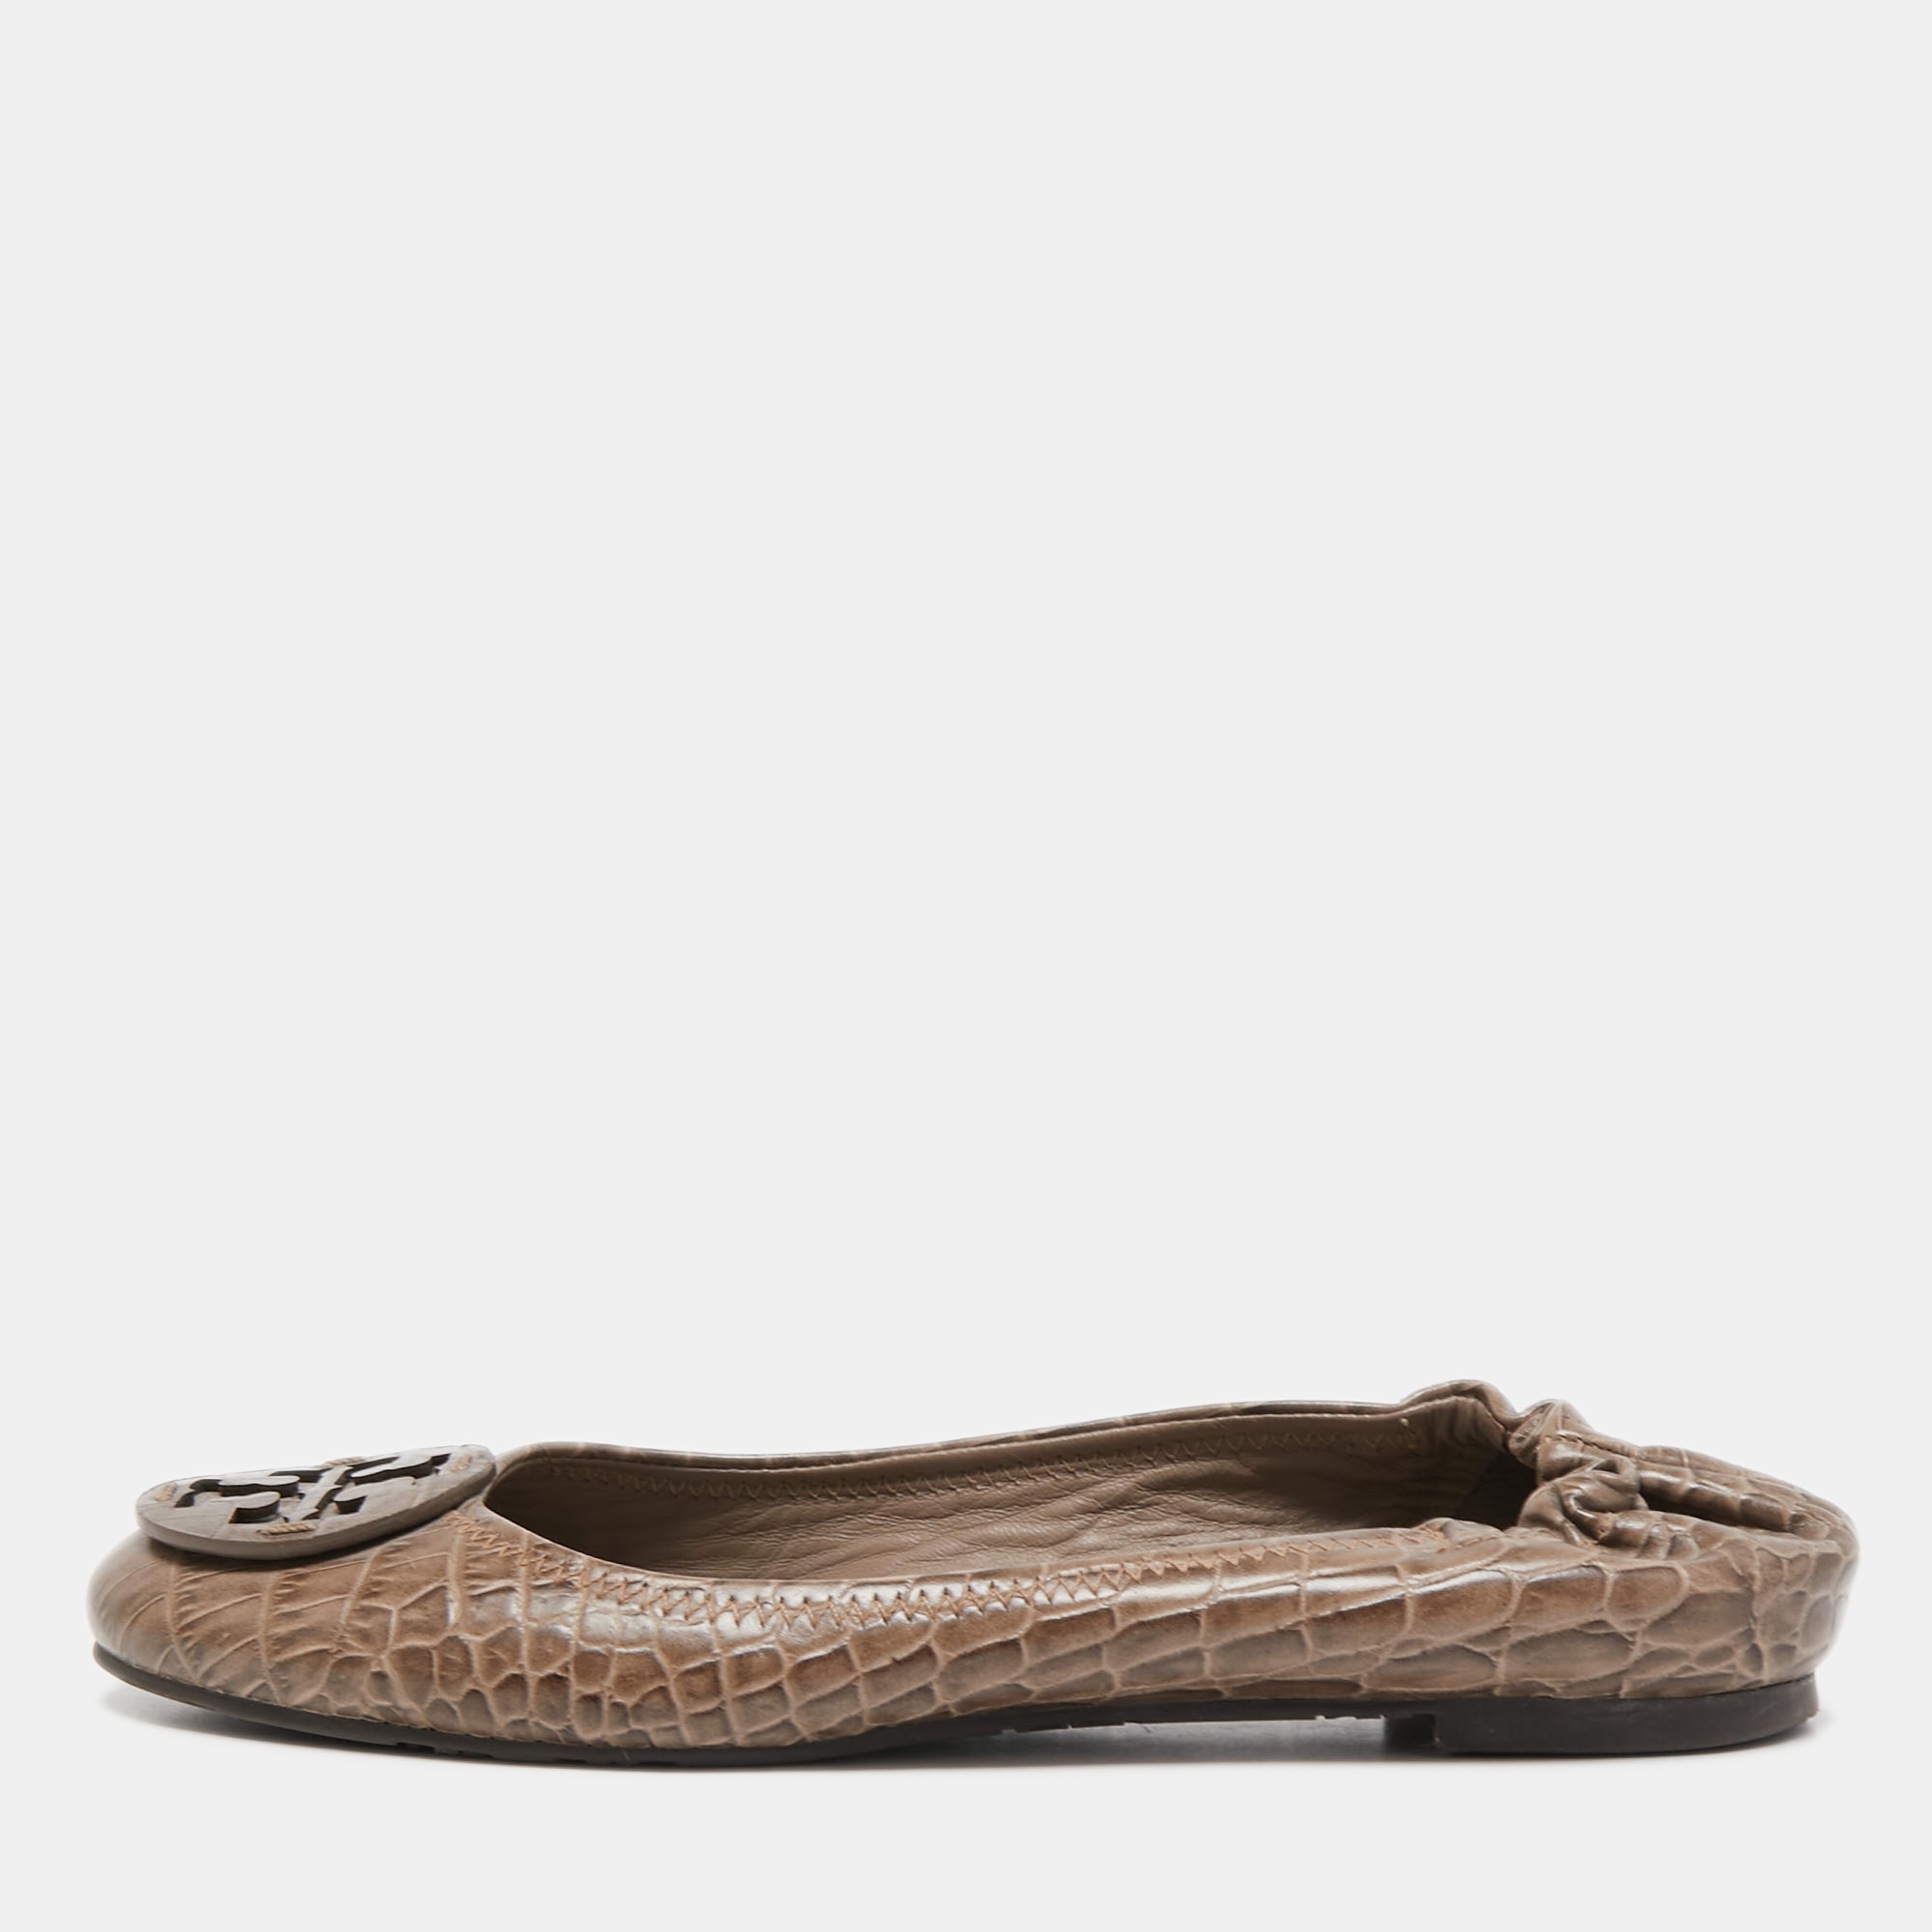 

Tory Burch Brown Croc Embossed Leather Reva Ballet Flats Size